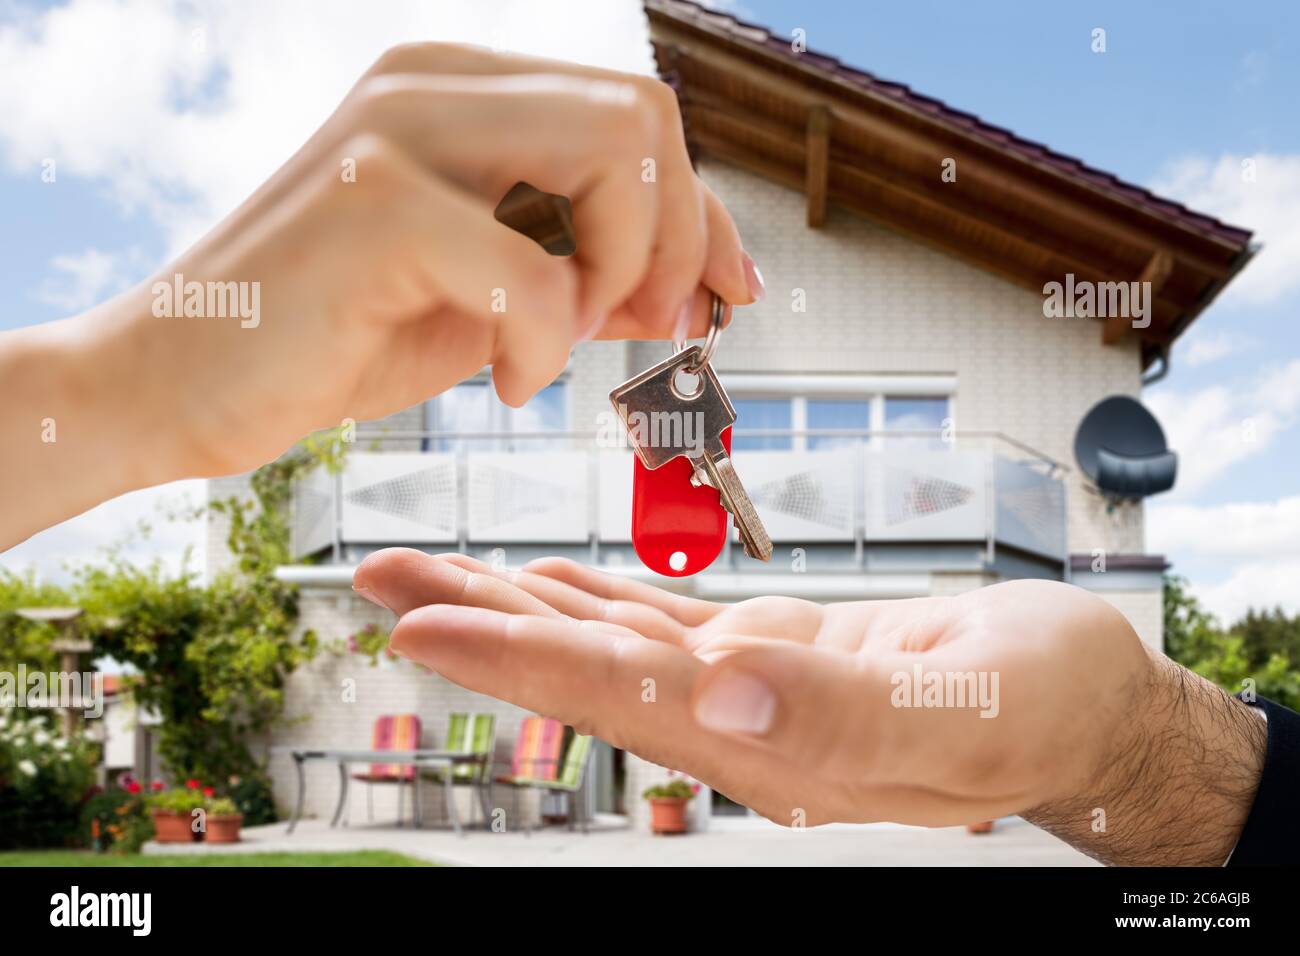 Buying House Or Home. New Real Estate Sale Stock Photo